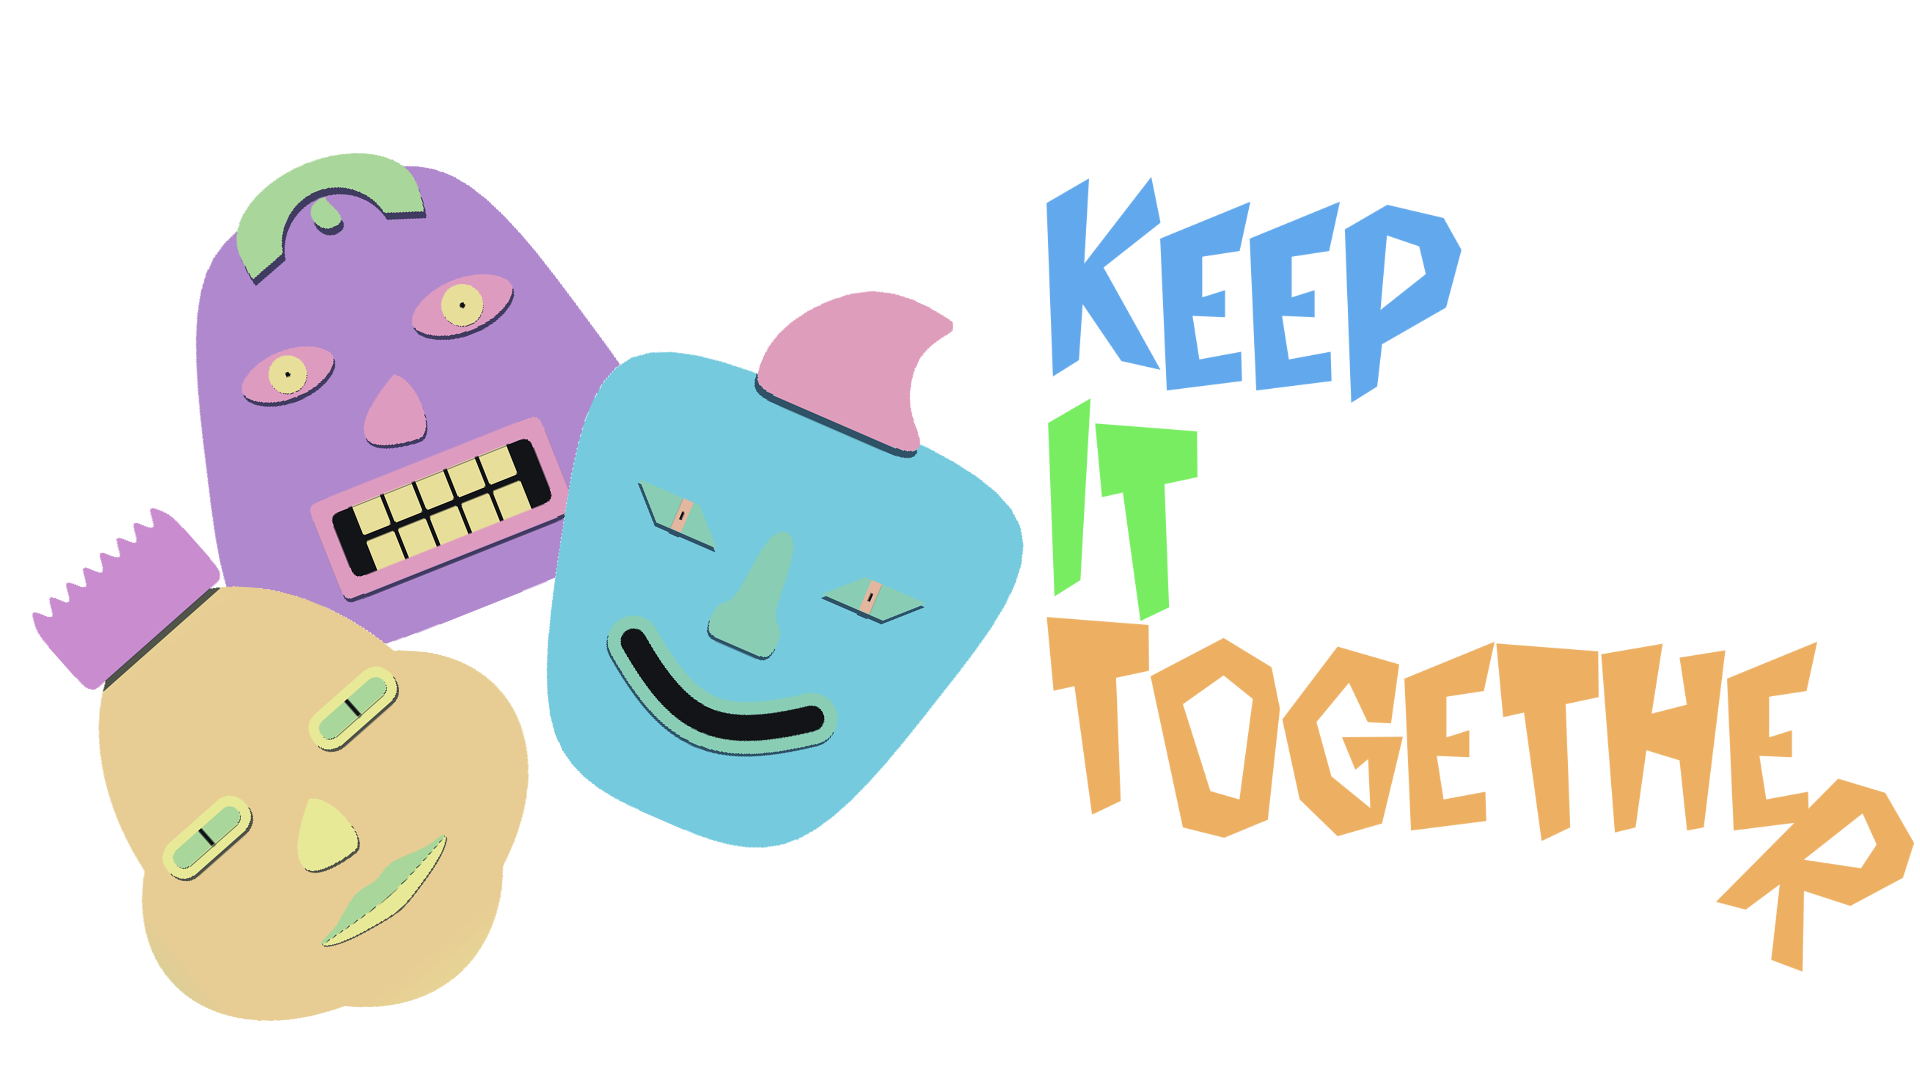 Keeping it together. Keep it. Keep it up игра. Let's do it together. Keeping it together перевести.